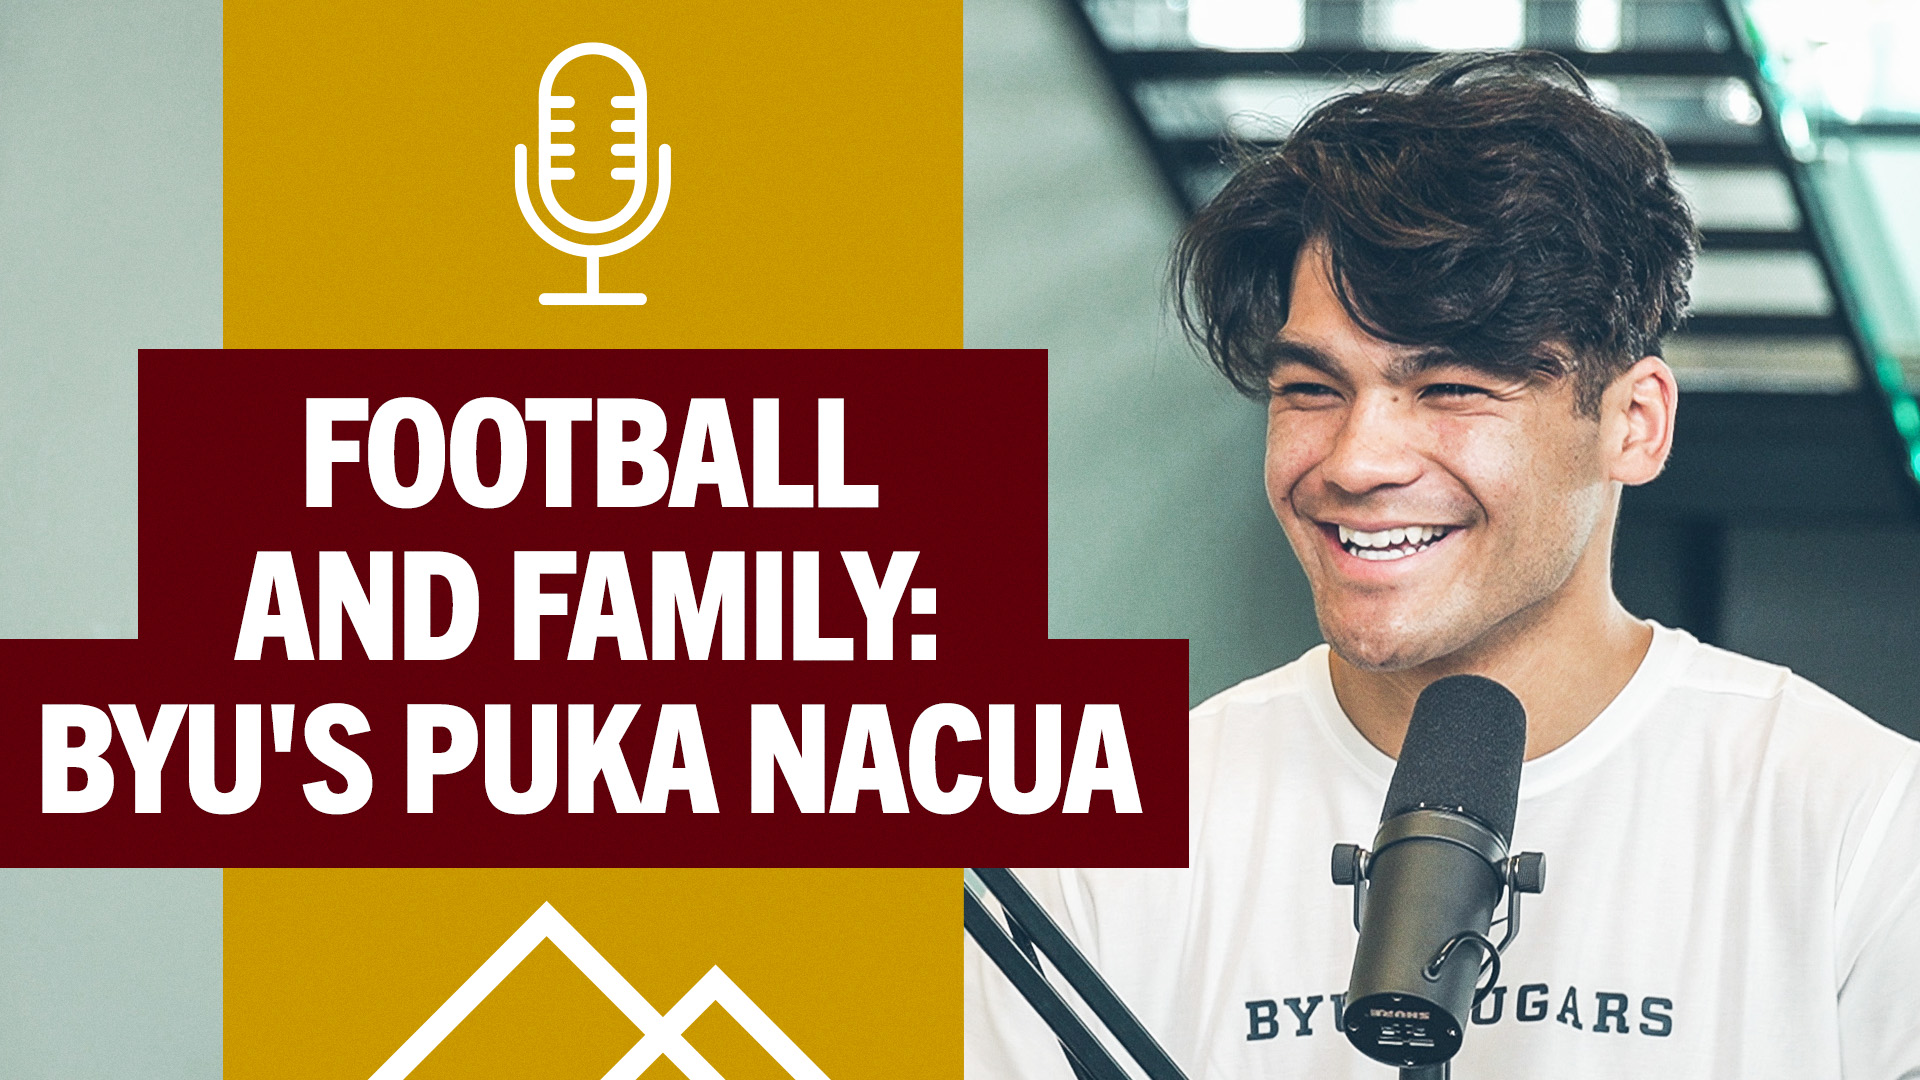 puka nacua smiling in front of microphone with text "football and family: byu's puka nacua"